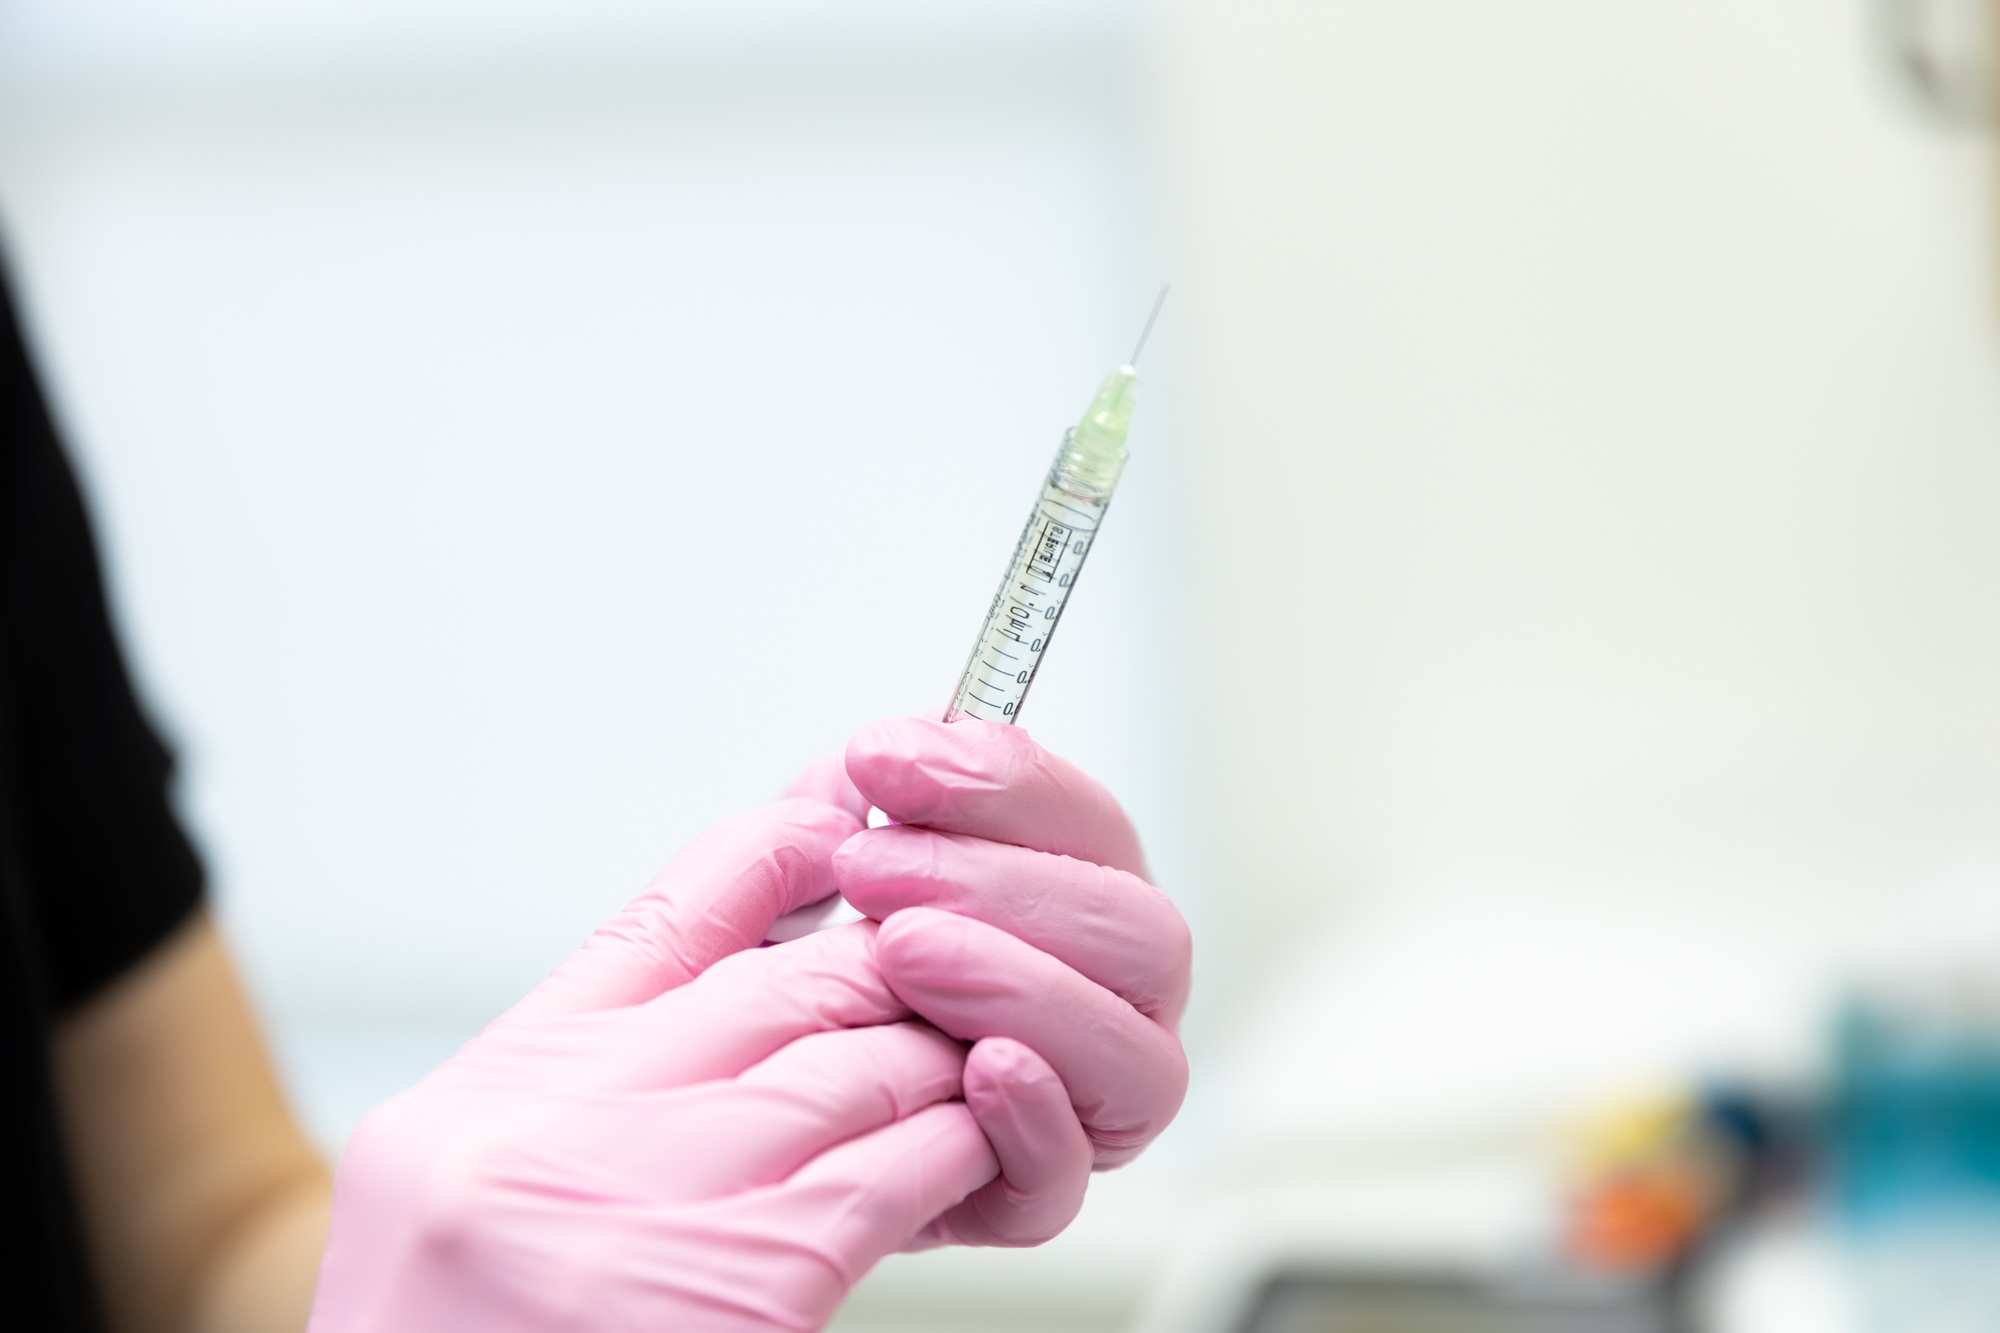 Image is of a pair of gloved hands holding up a syringe. The needle sticks out of the top of the syringe.